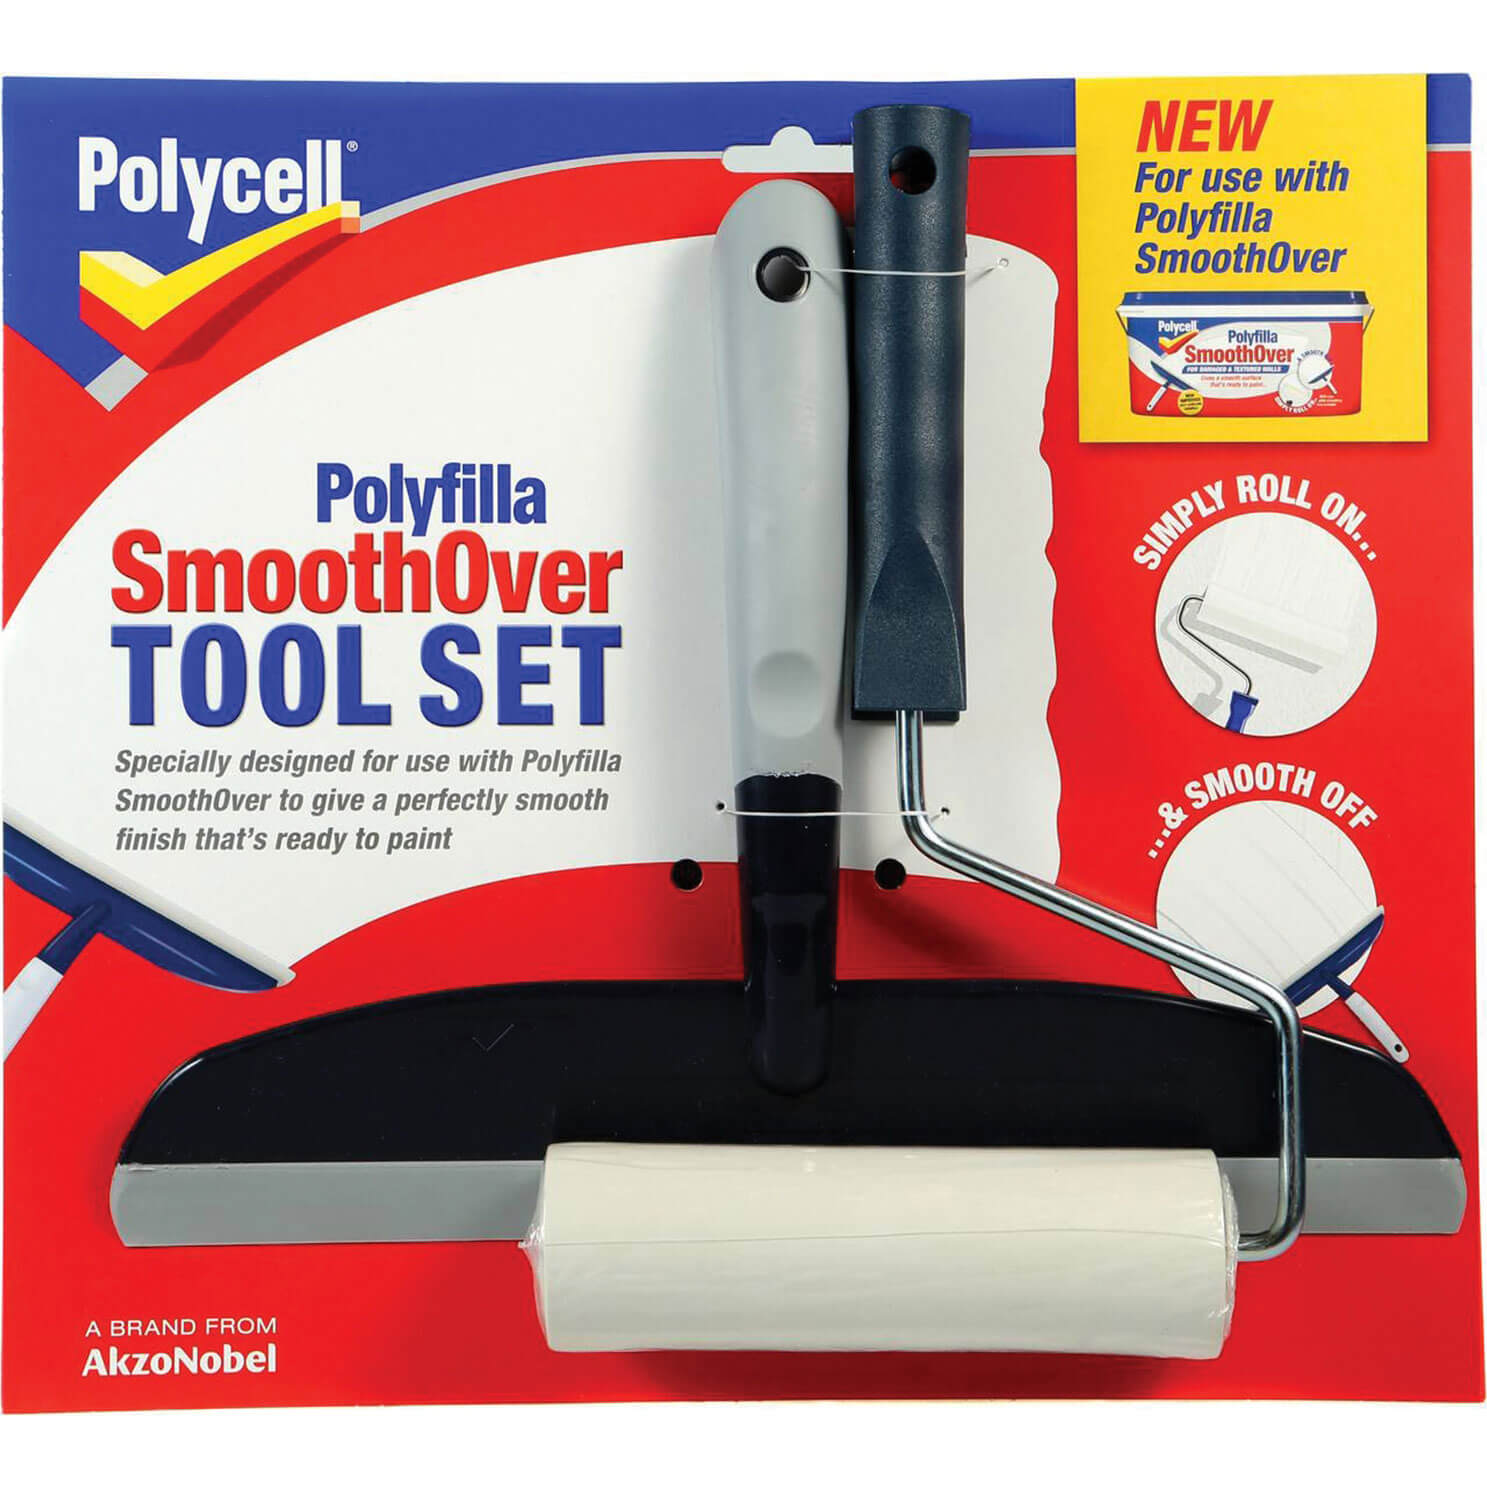 Image of Polycell Polyfilla SmoothOver Roller and Spreader Kit